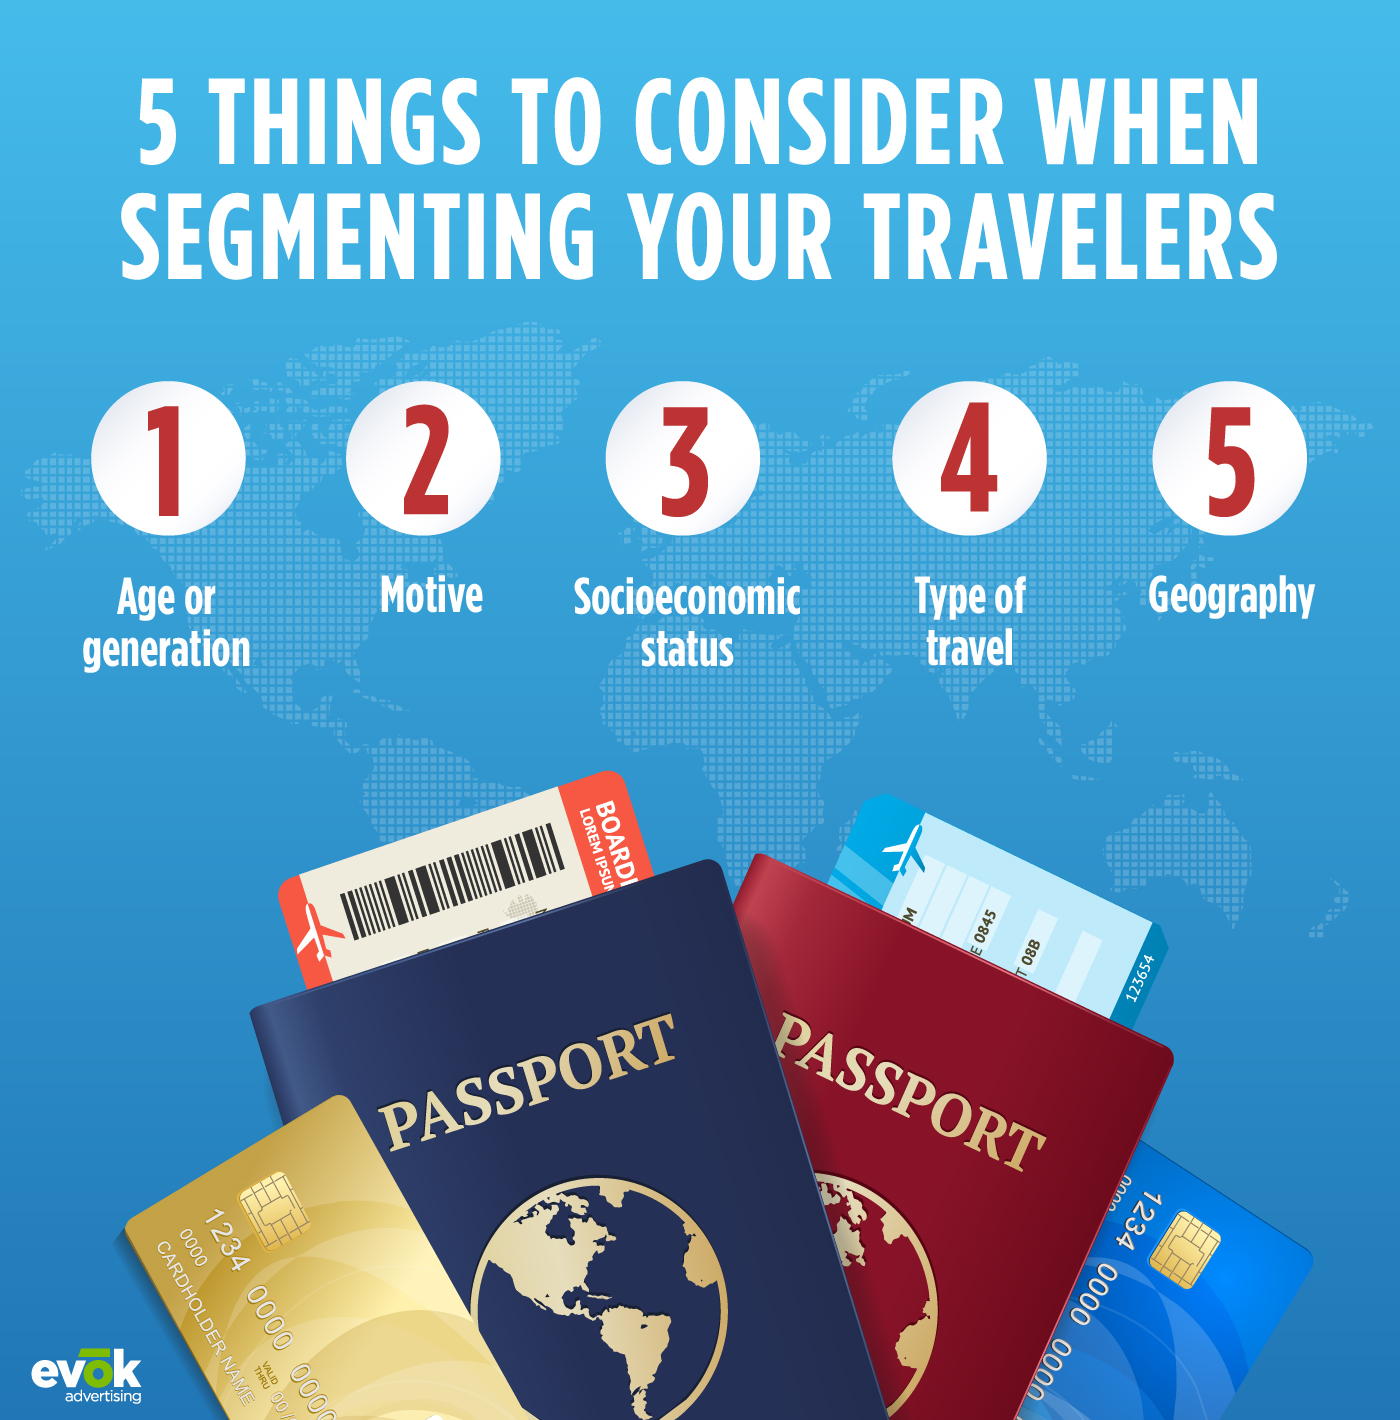 5 Traveler segments that can make all the difference in your digital marketing strategy.